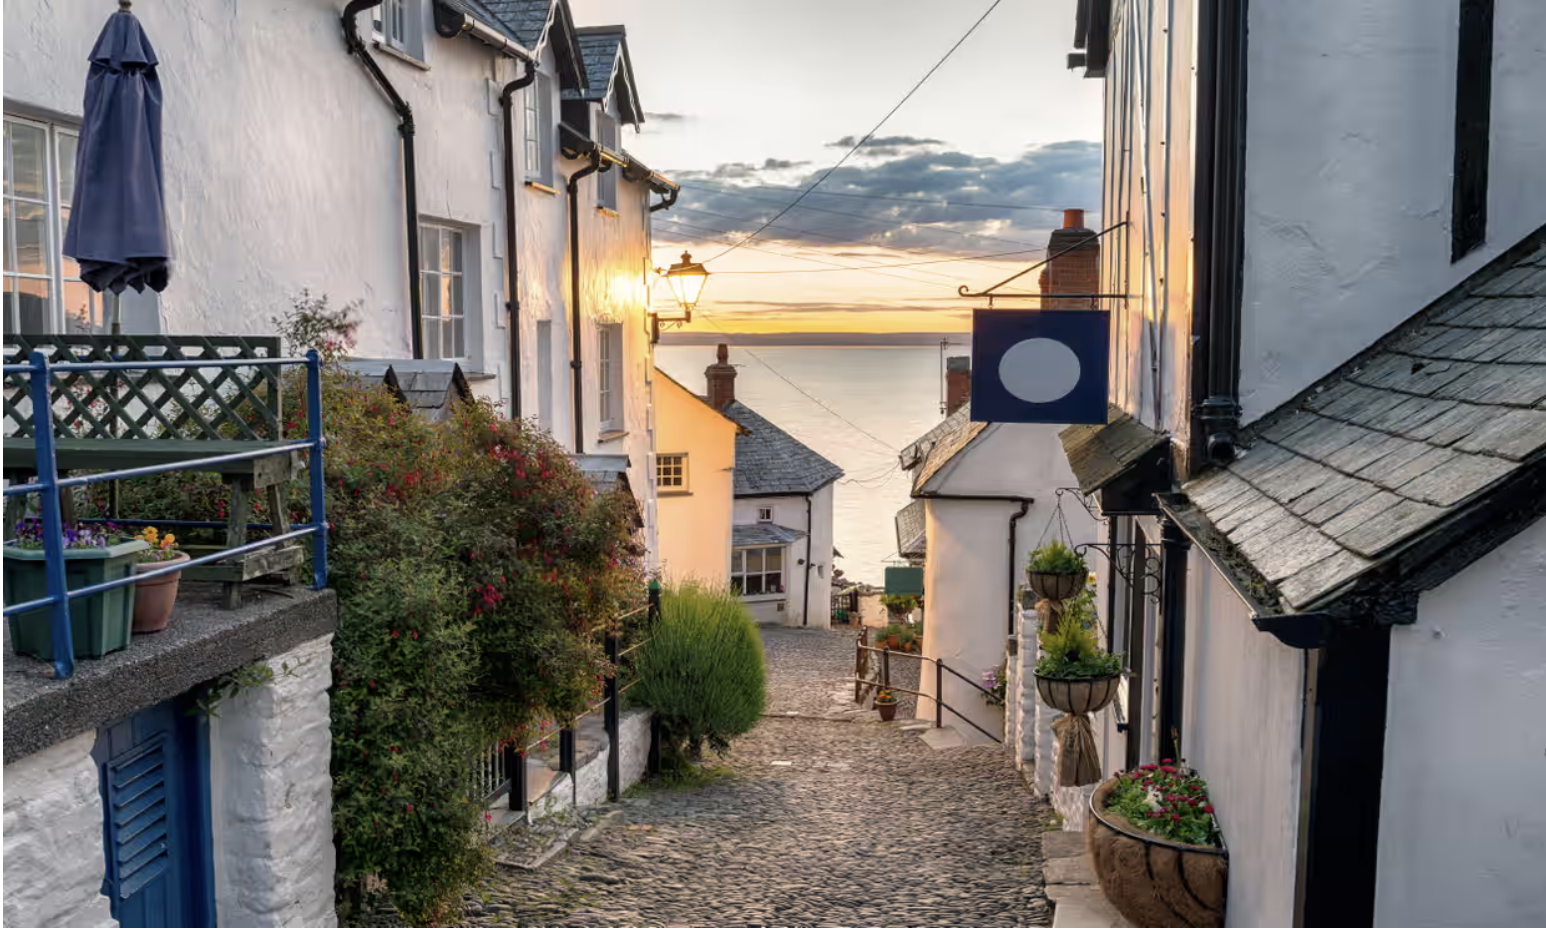 ‘The template for the idyllic English coastal village’ – The Guardian